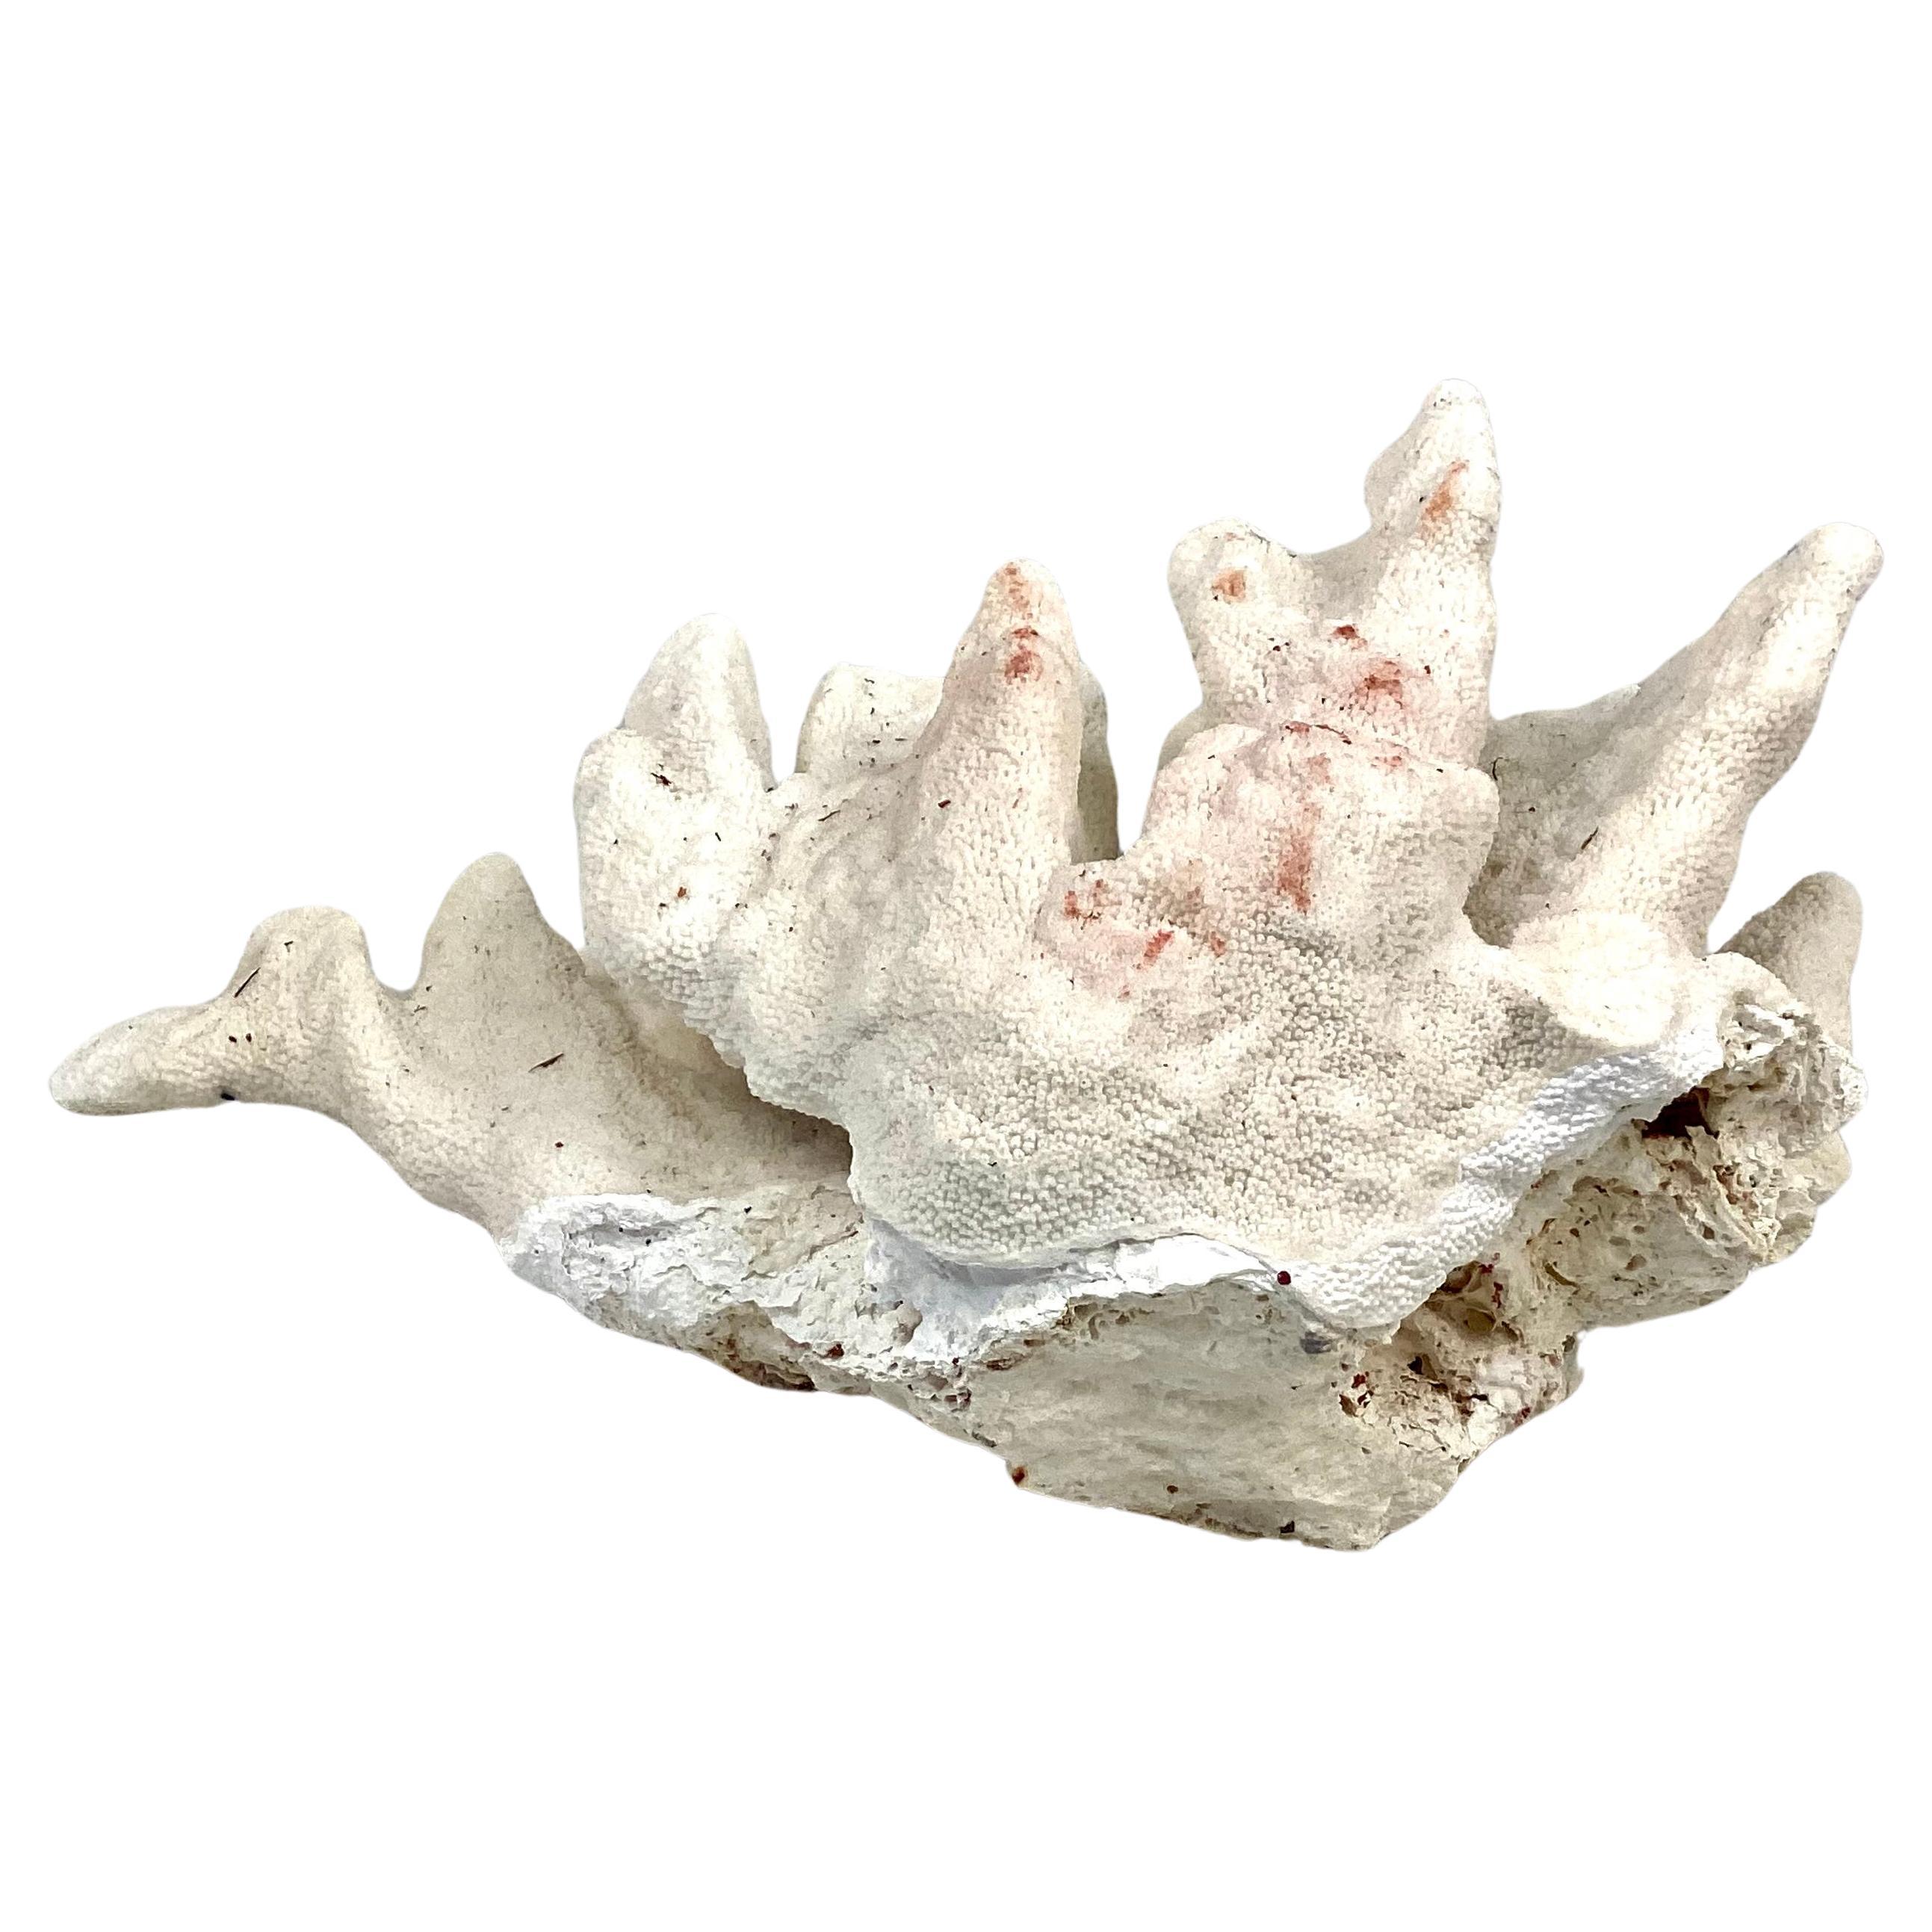 Large Natural White Coral Reef Specimen #6 In Good Condition For Sale In Bradenton, FL